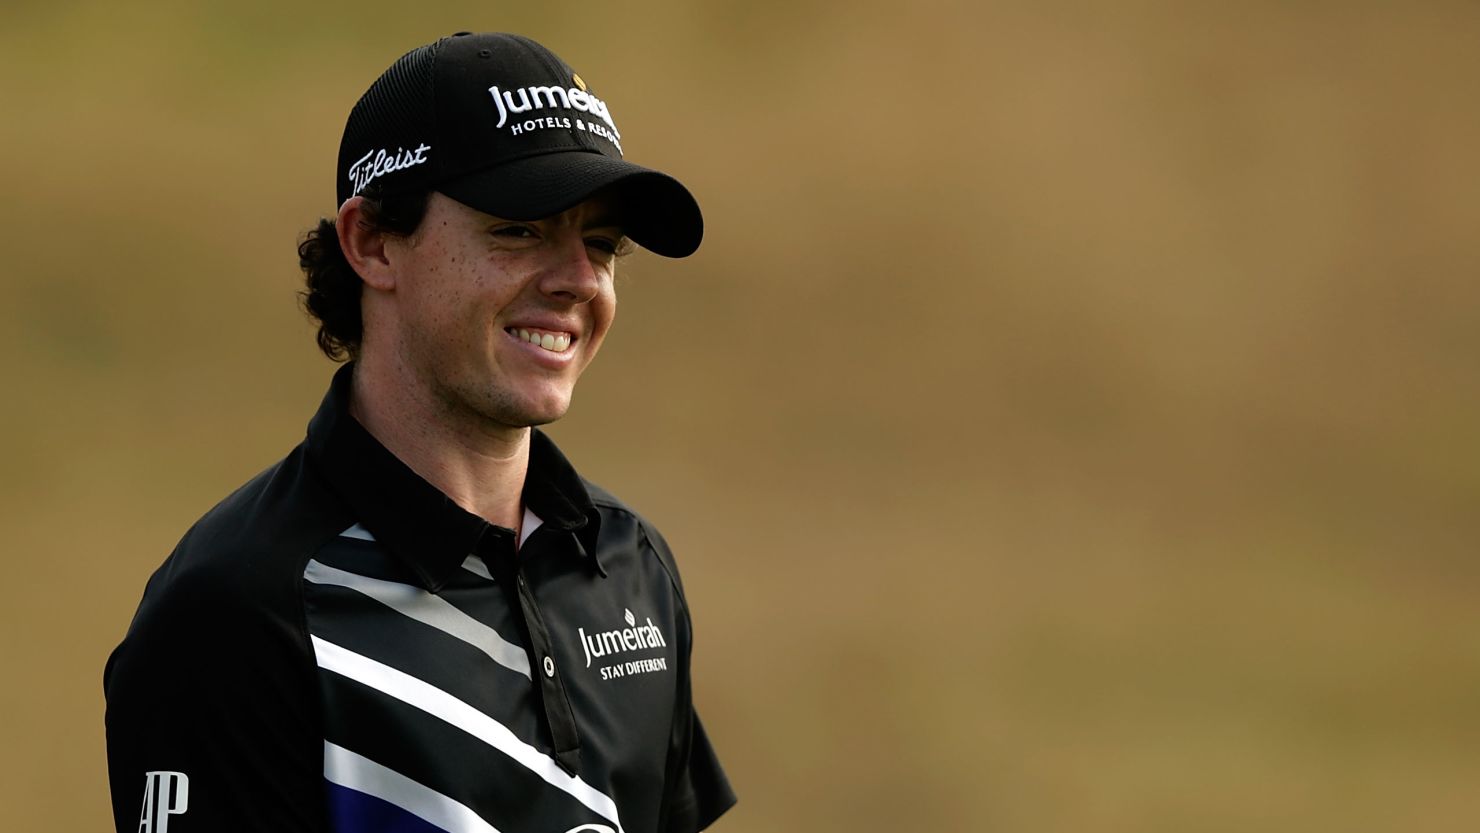 Rory McIlroy had plenty of reasons to smile after carding a second-round 65 on Friday.